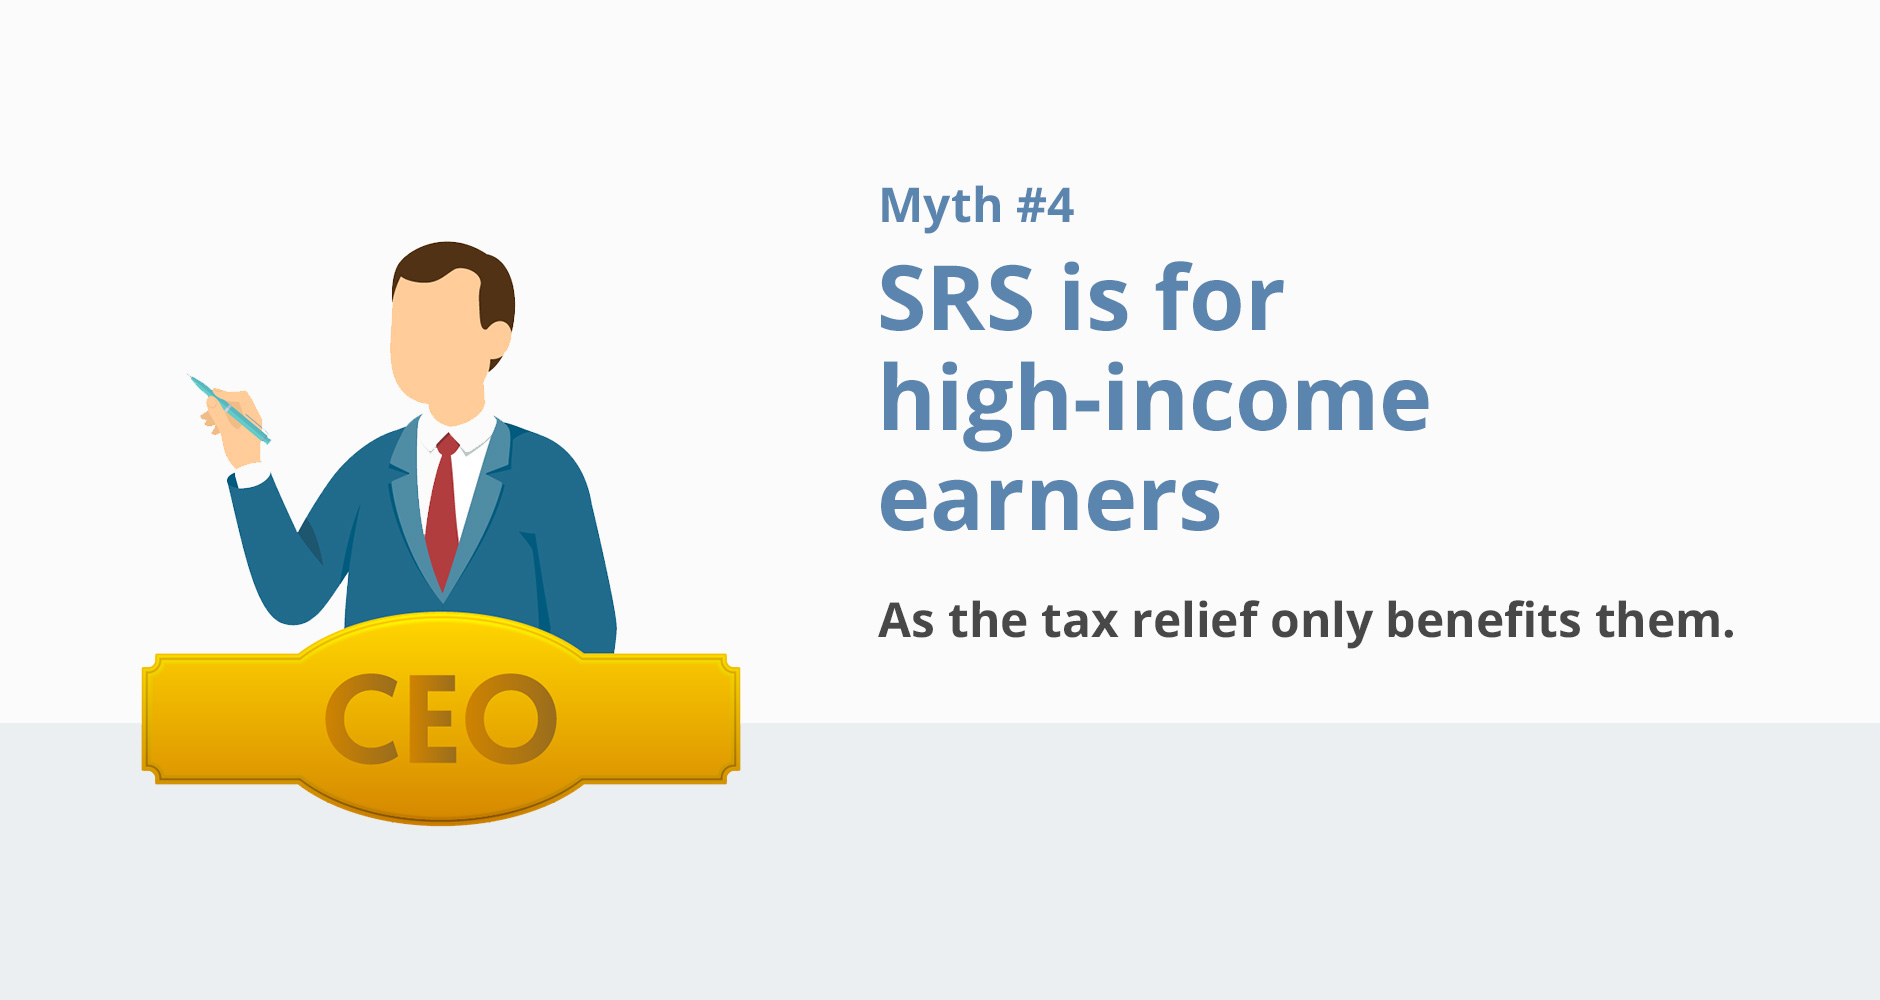 Myth #4: Only High-Income Earners Should Apply For The SRS